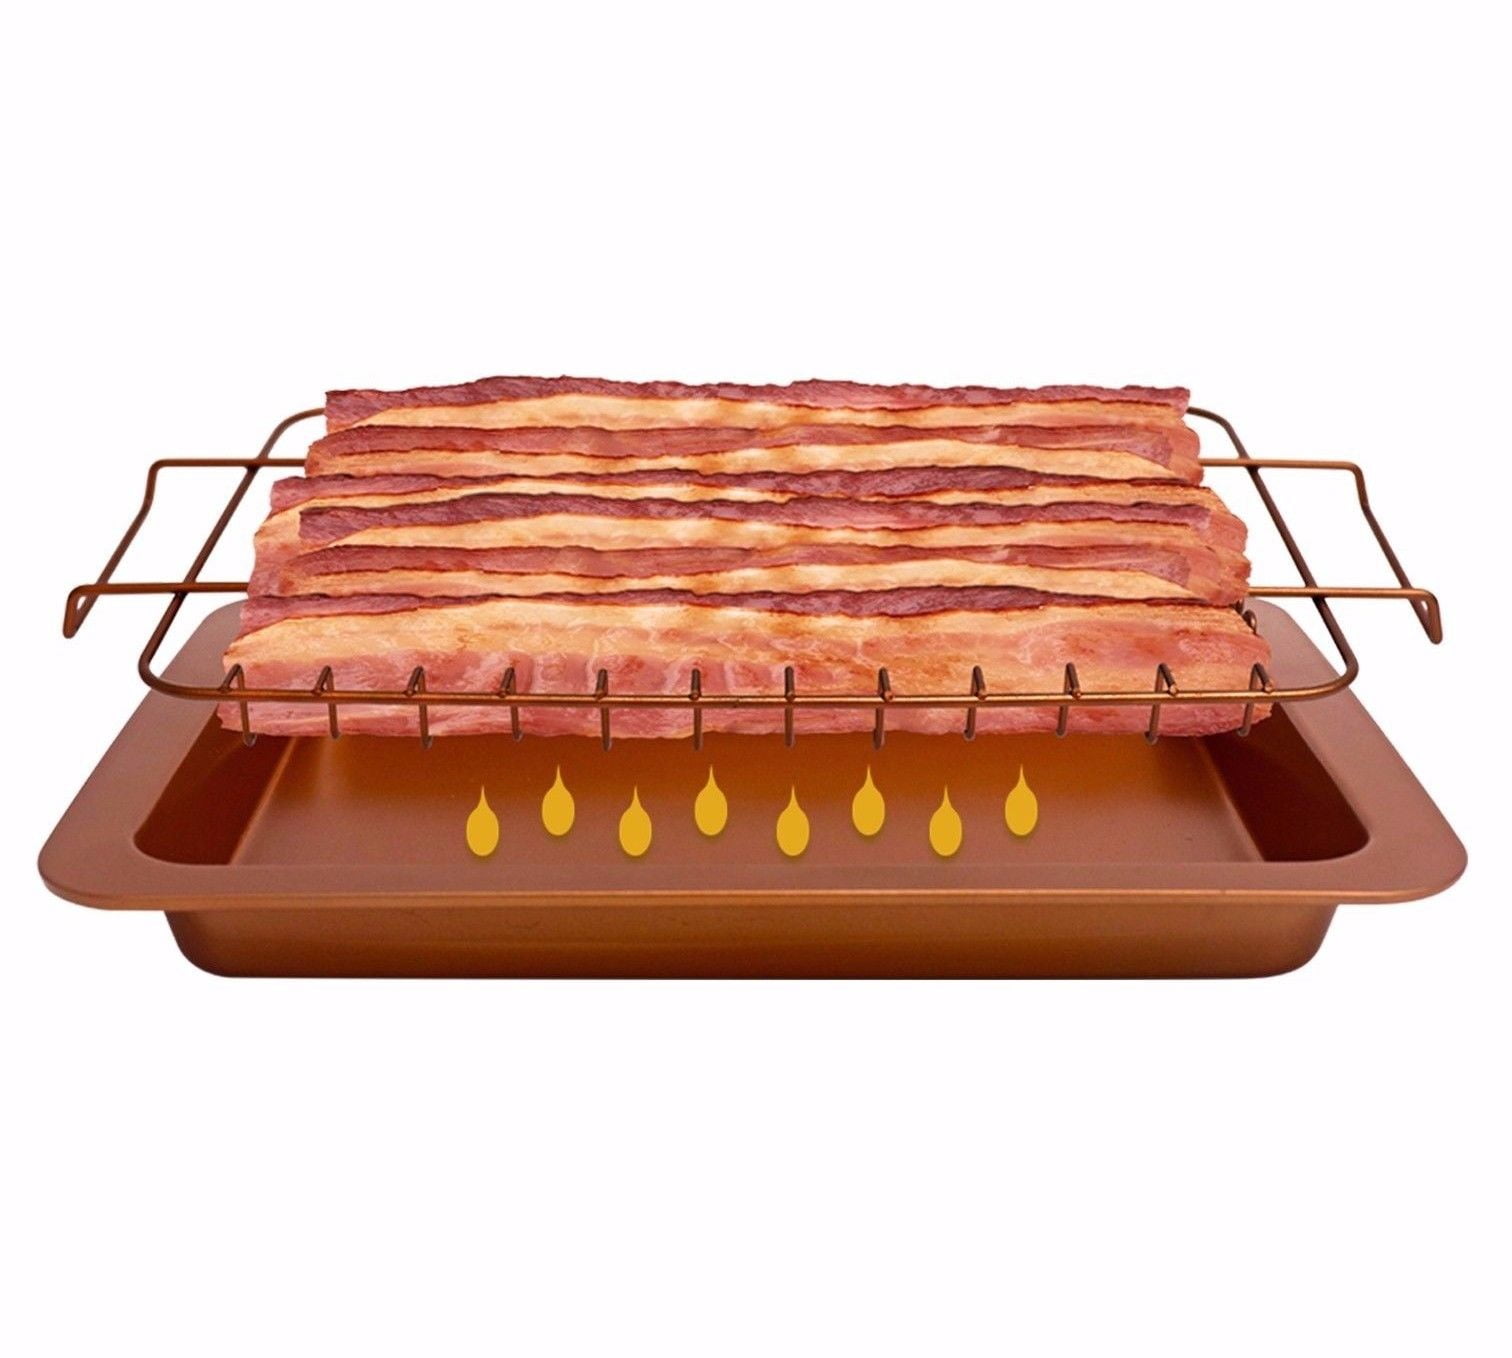 Bacon Bonanza by Gotham Steel Nonstick Oven Cooker As Seen On TV 